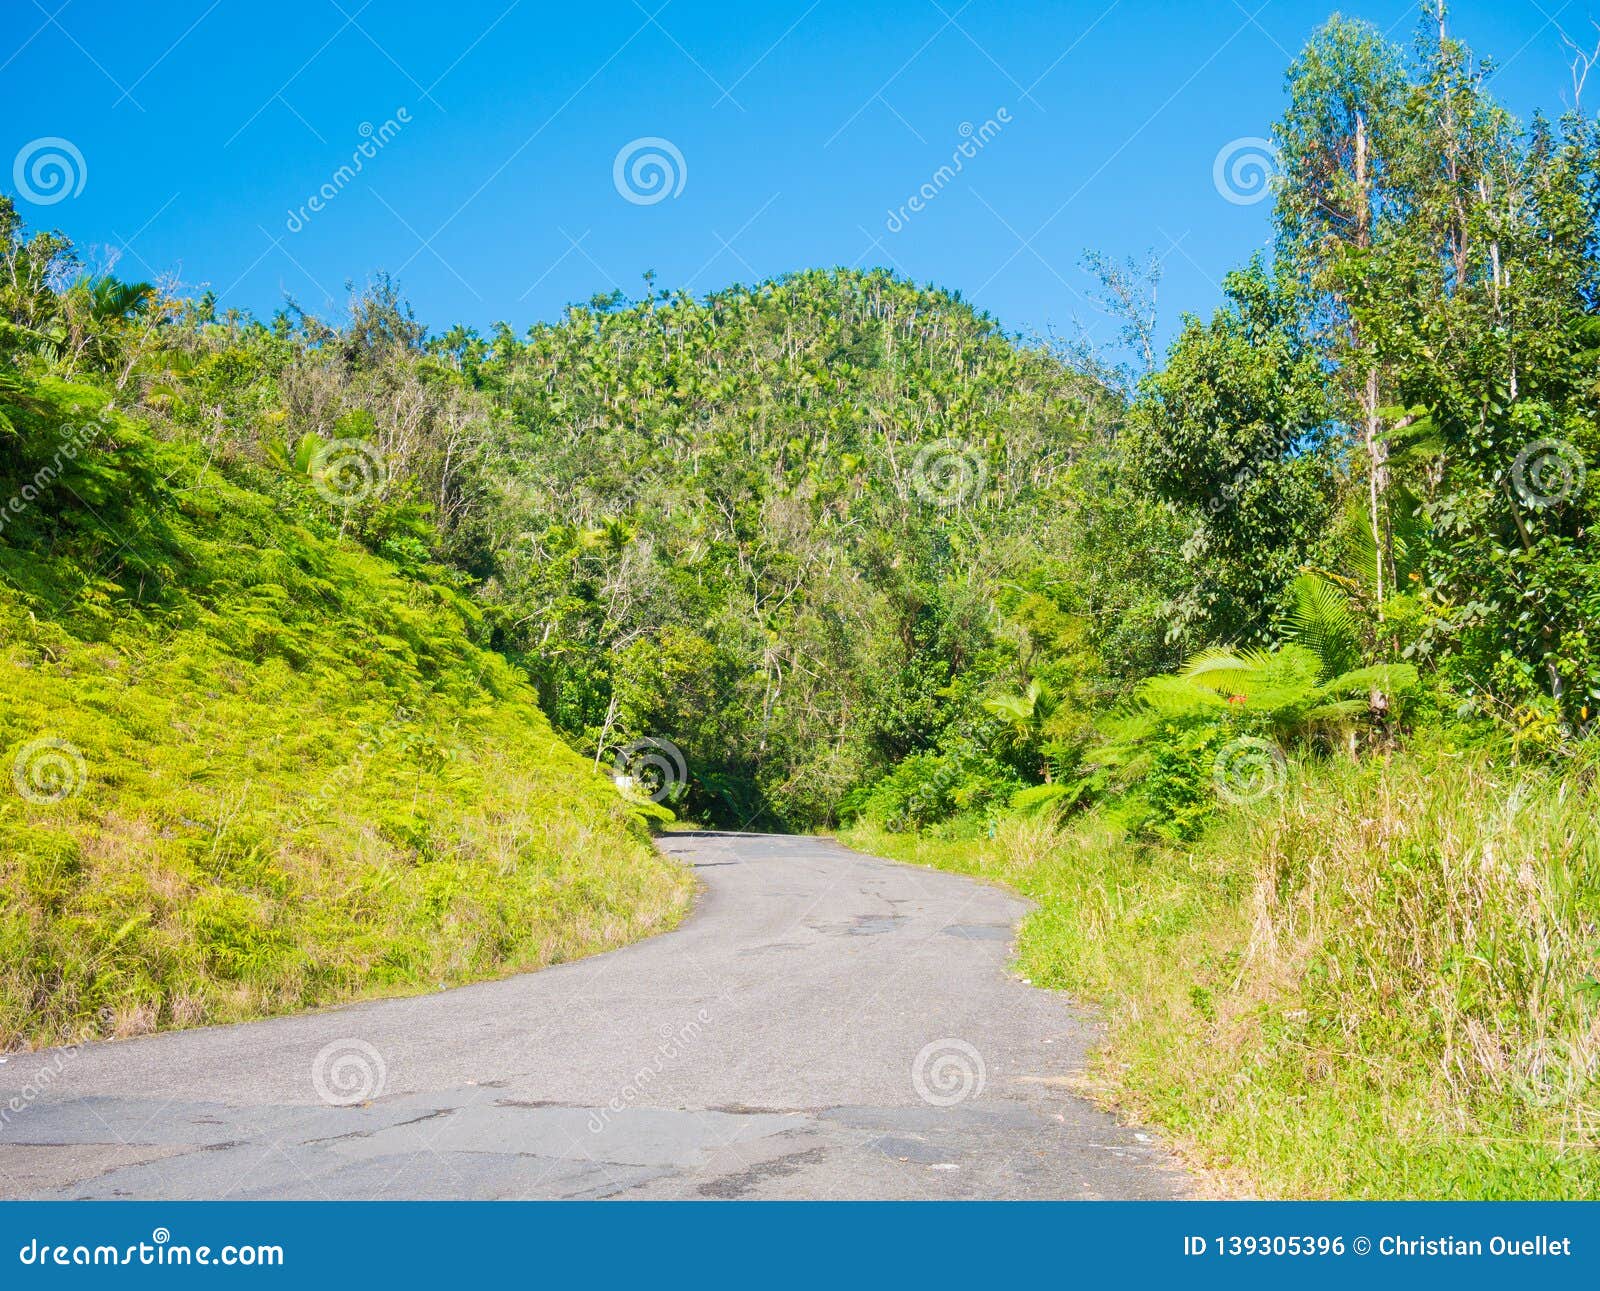 ruta panoramica road in puerto rico. usa. this road is little used by tourists but allows to leave the tourist circuit and offers